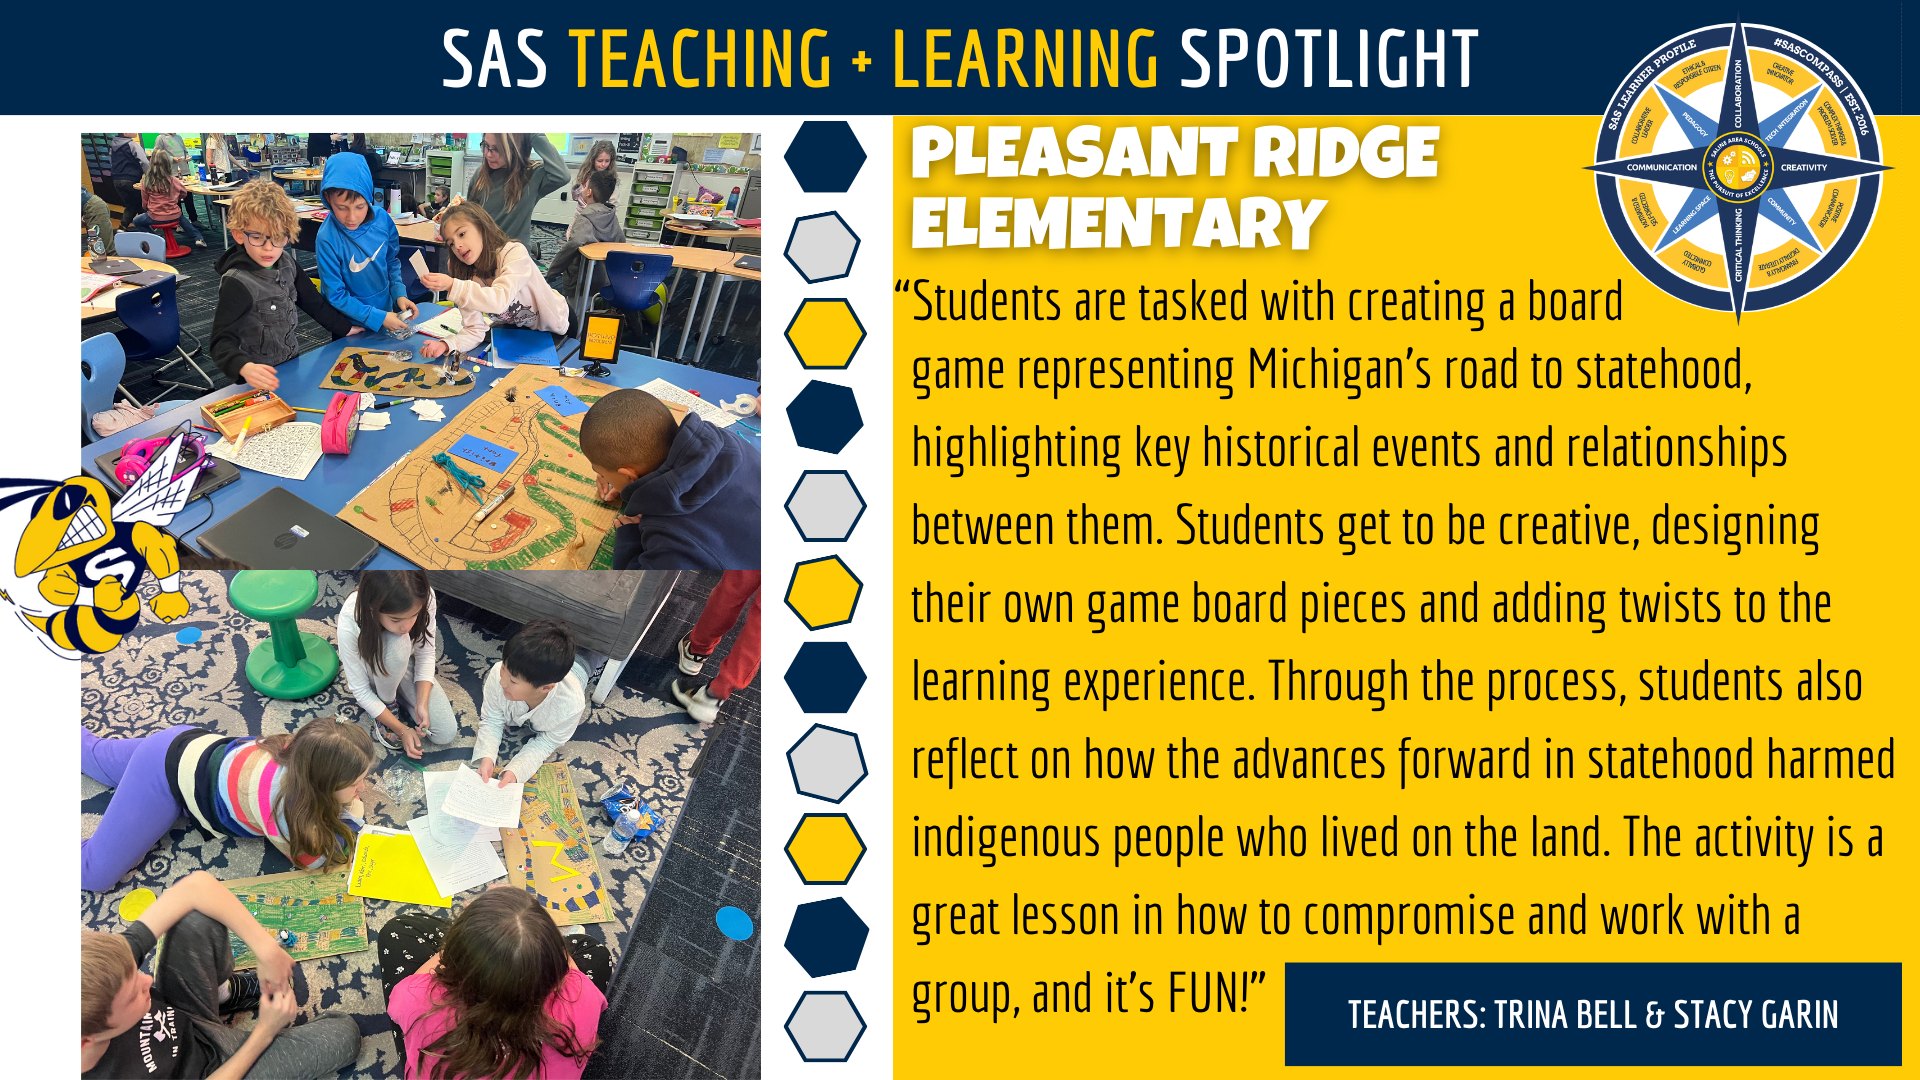 students are tasked with creating a board game representing Michigan's road to statehood, highlighting key historical events and relationships between them. Students get to be creative, designing their own game board pieces and adding twists to the learning experience. Through the process, students also reflect on how the advances forward in statehood harmed indigenous people who lived on the land. The activity is a great lesson in how to compromise and work with a group and it's FUN.